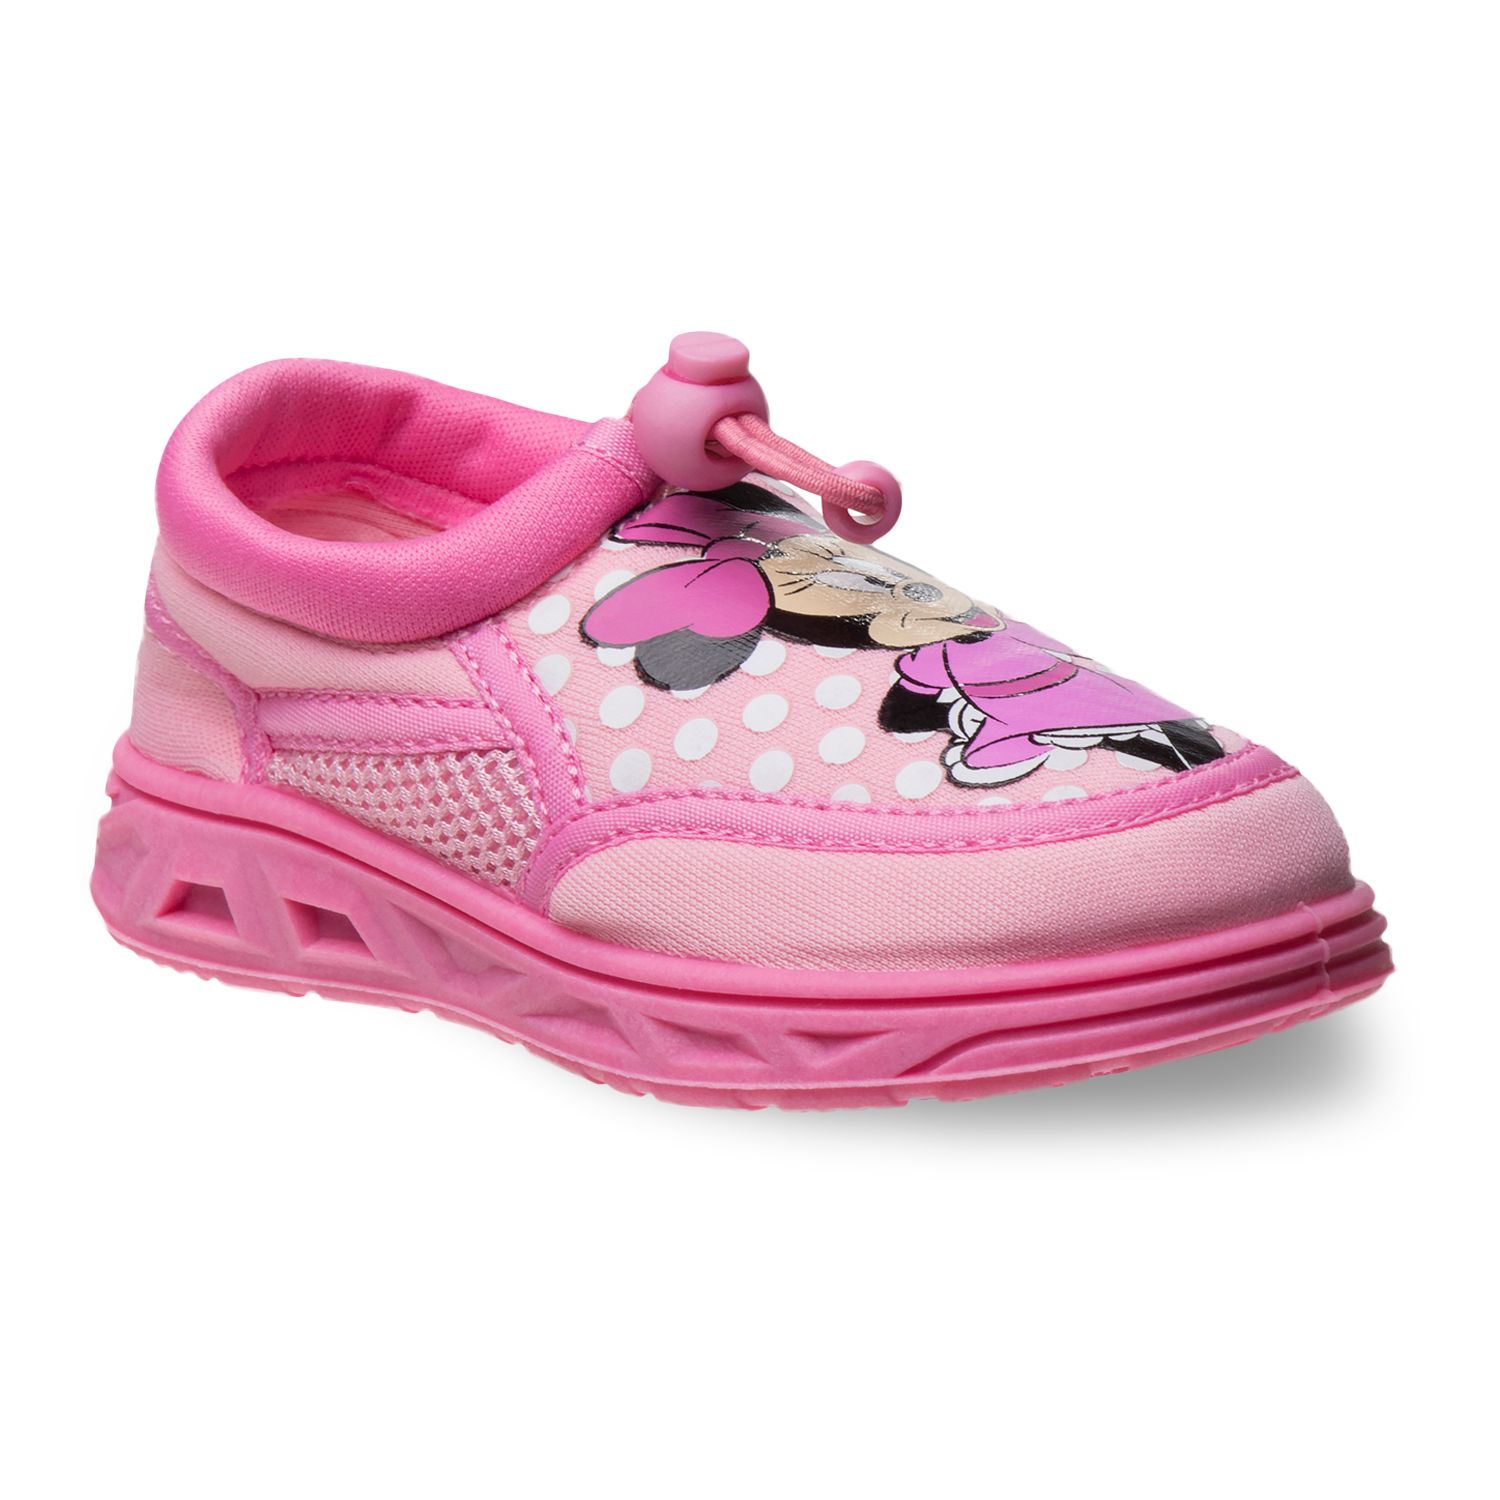 Image for Disney 's Minnie Mouse Toddler Girls' Water Shoes at Kohl's.